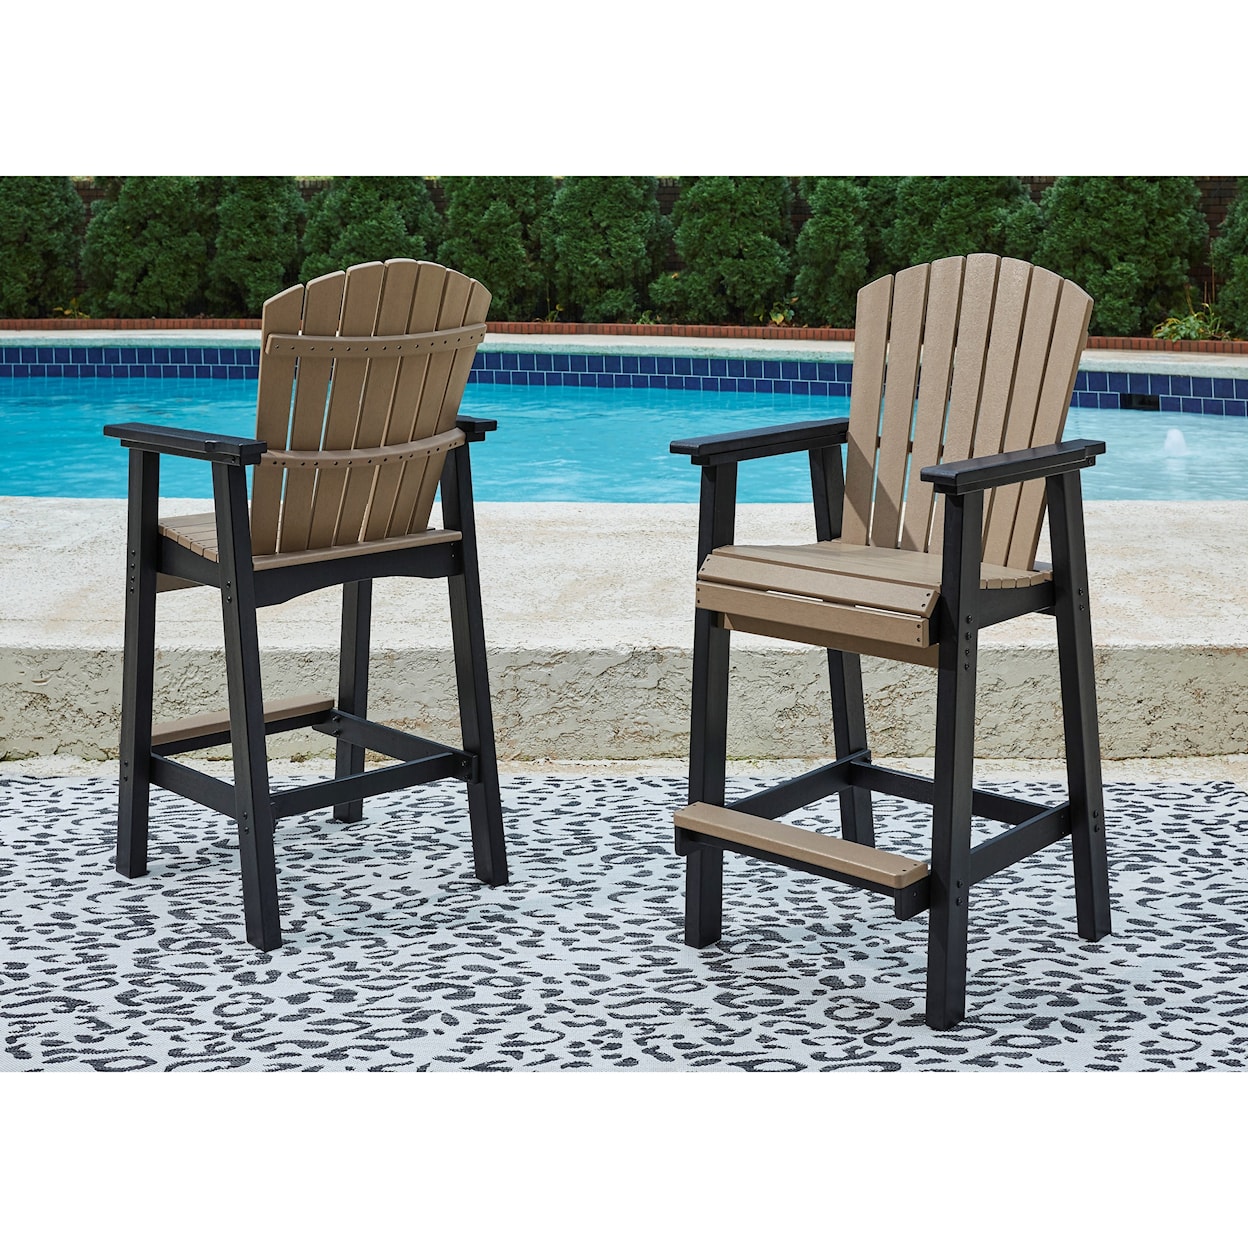 Signature Design by Ashley Fairen Trail Set of 2 Tall Barstools